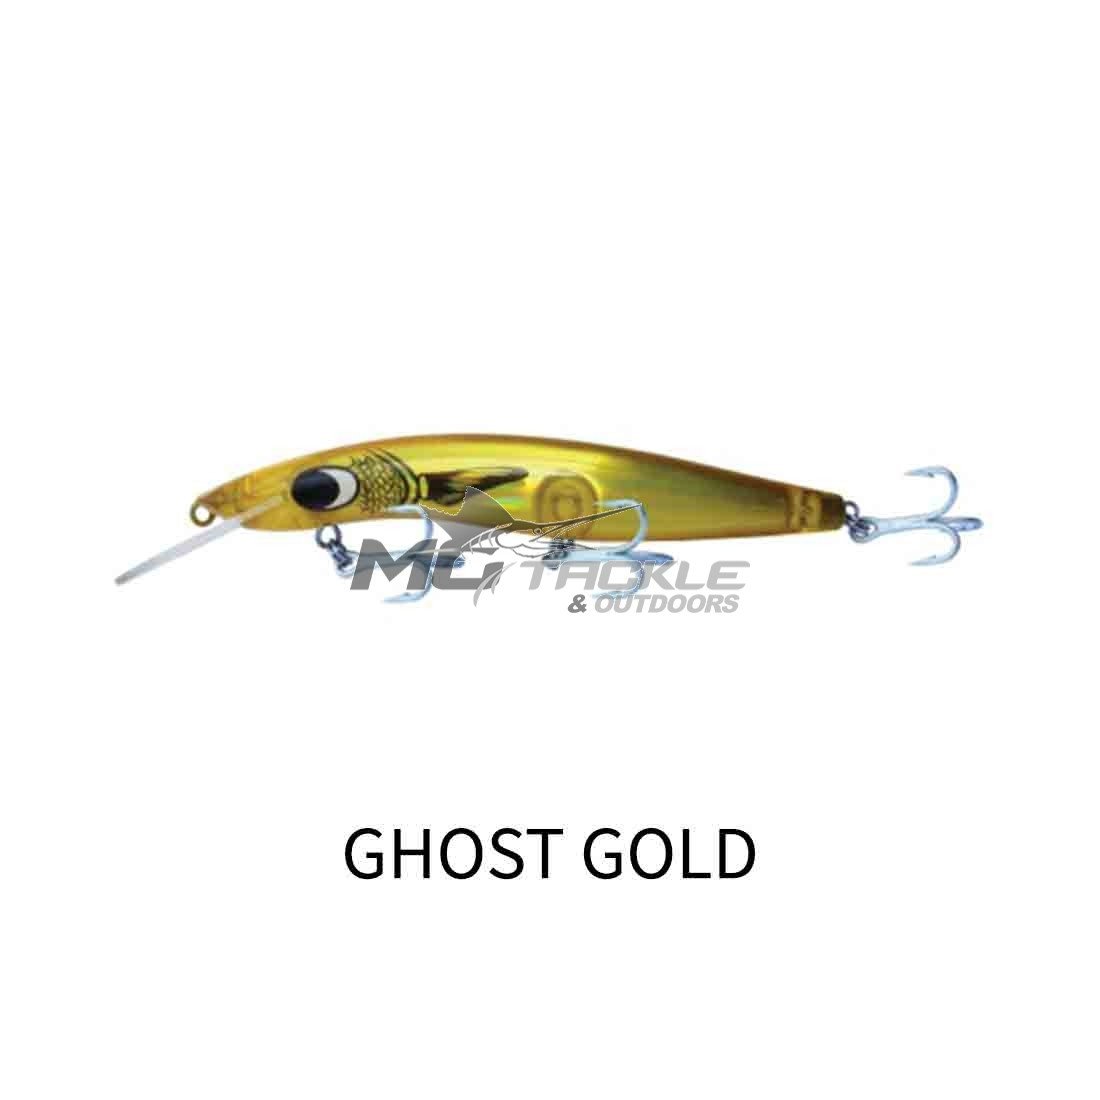 THE PRODUCERS GHOST Type F Fishing Lure in Package Model 732 $11.00 -  PicClick